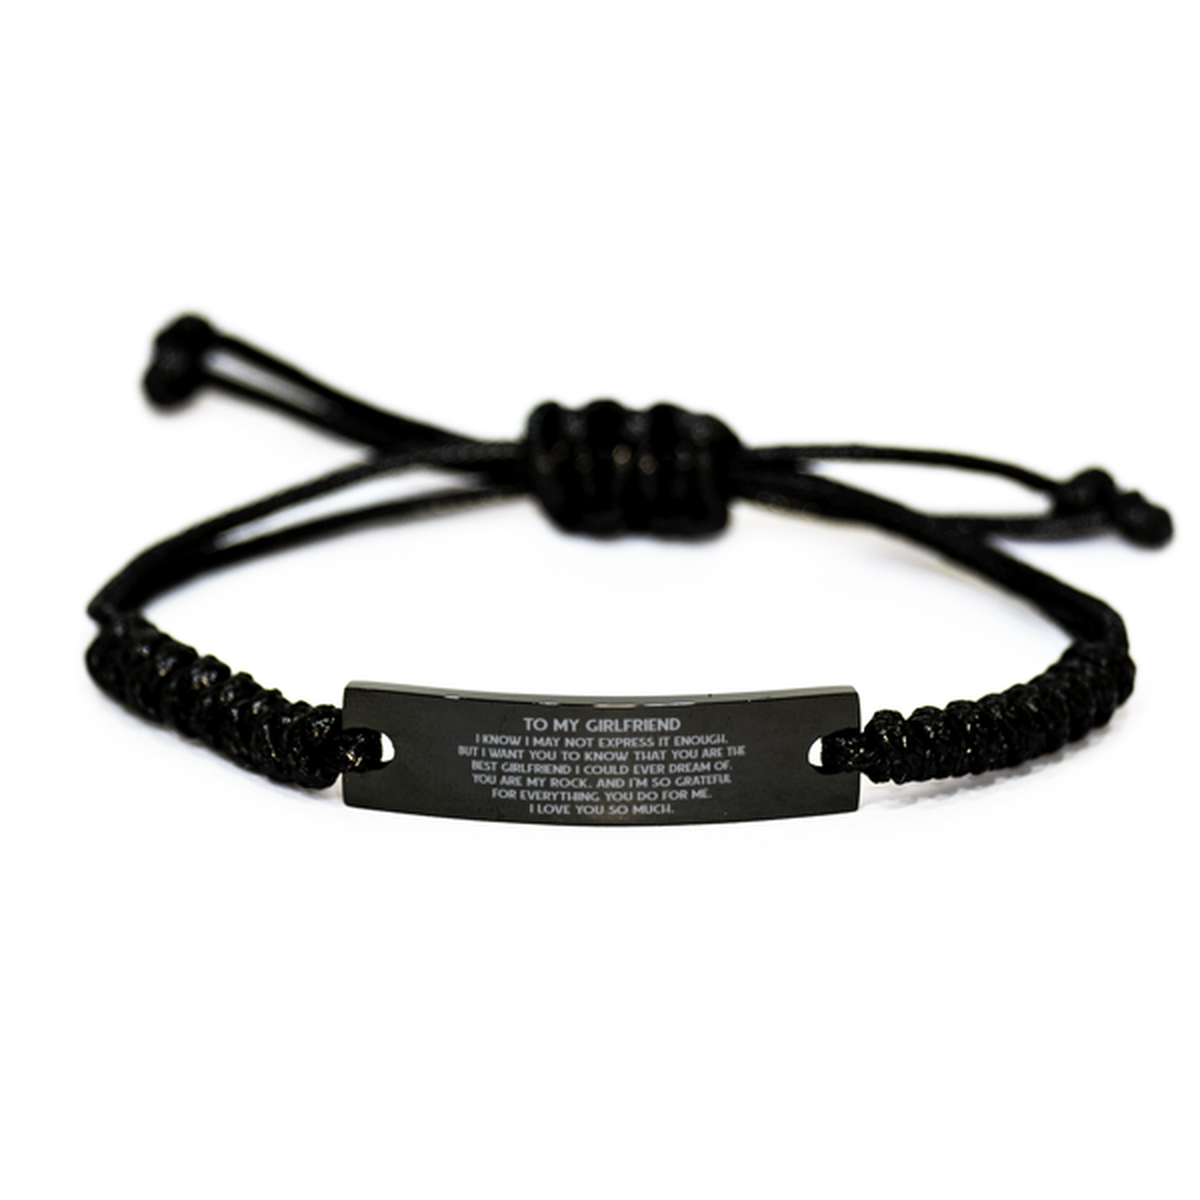 To My Girlfriend Rope Bracelet, I Love You So Much, Birthday Gifts For Girlfriend From Boyfriend, Valentines Gifts For Women